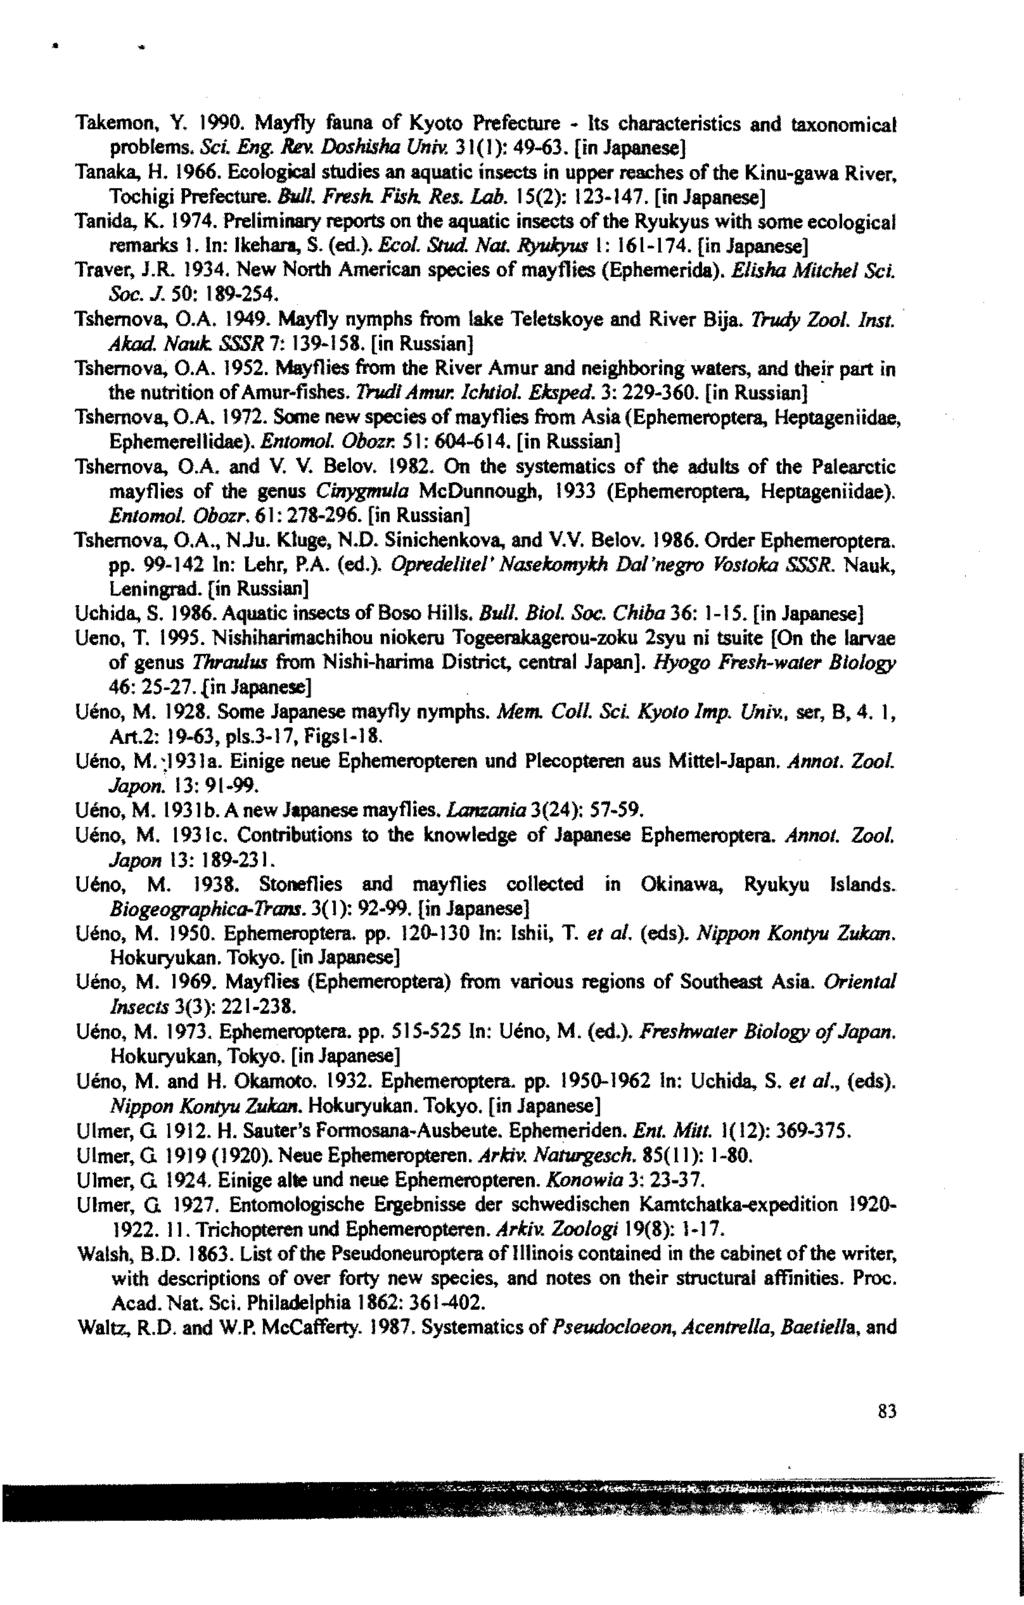 Takemon, Y. 1990. Mayfly fauna of Kyoto Prefecture - Its characteristics and taxonomical problems. Sci. Eng. Rev. Doshisha Univ. 31(1): 49-63. [in Japanese] Tanaka. H. 1966.